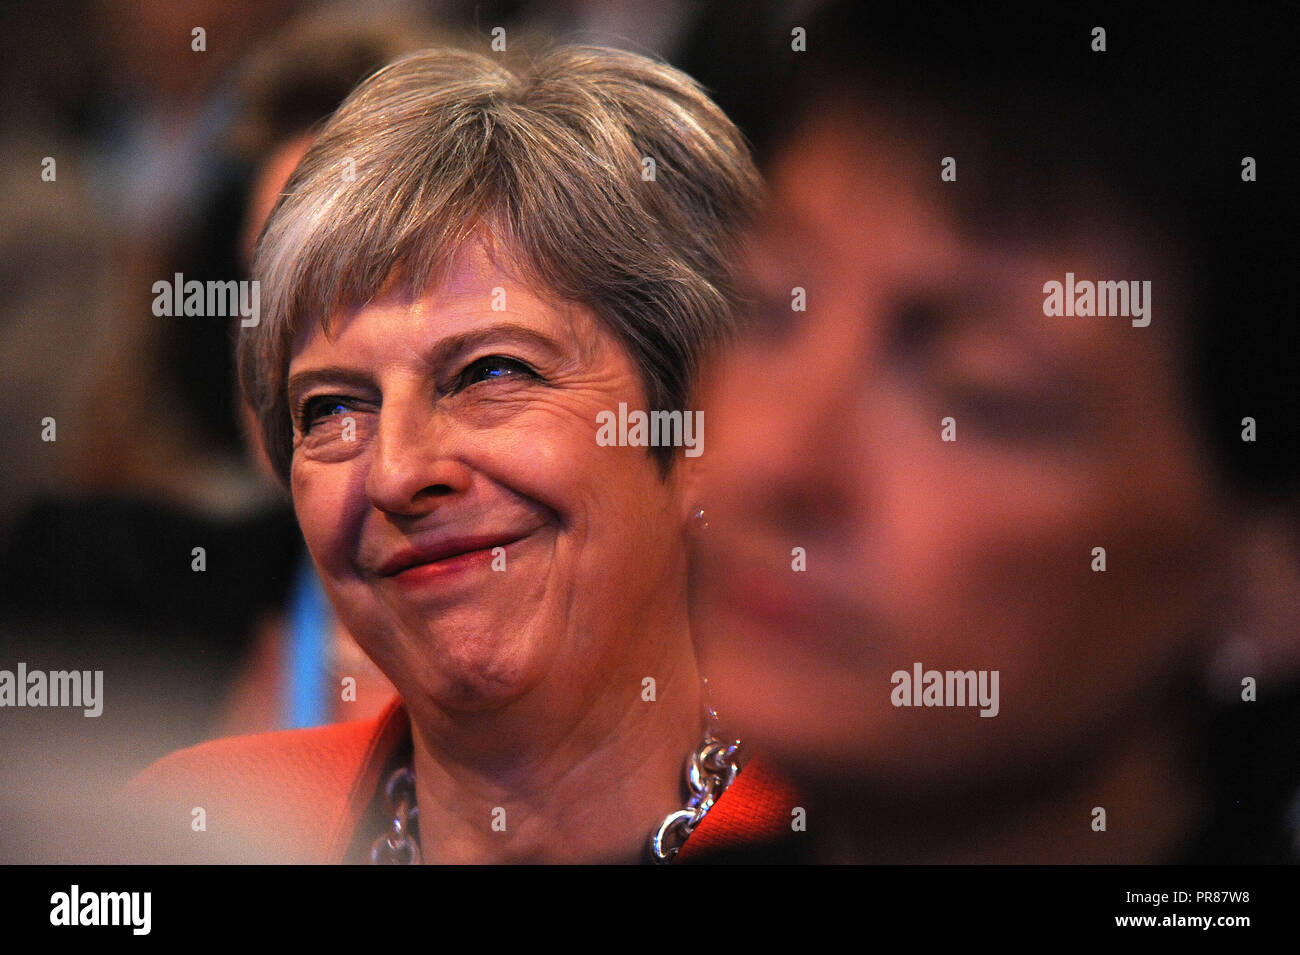 Birmingham, UK. 30th September, 2018.  Theresa May MP, Prime Minister and Leader of the Conservative Party, listening to opening speeches to conference on the first session of the first day of the Conservative Party annual conference at the ICC.  Kevin Hayes/Alamy Live News Stock Photo